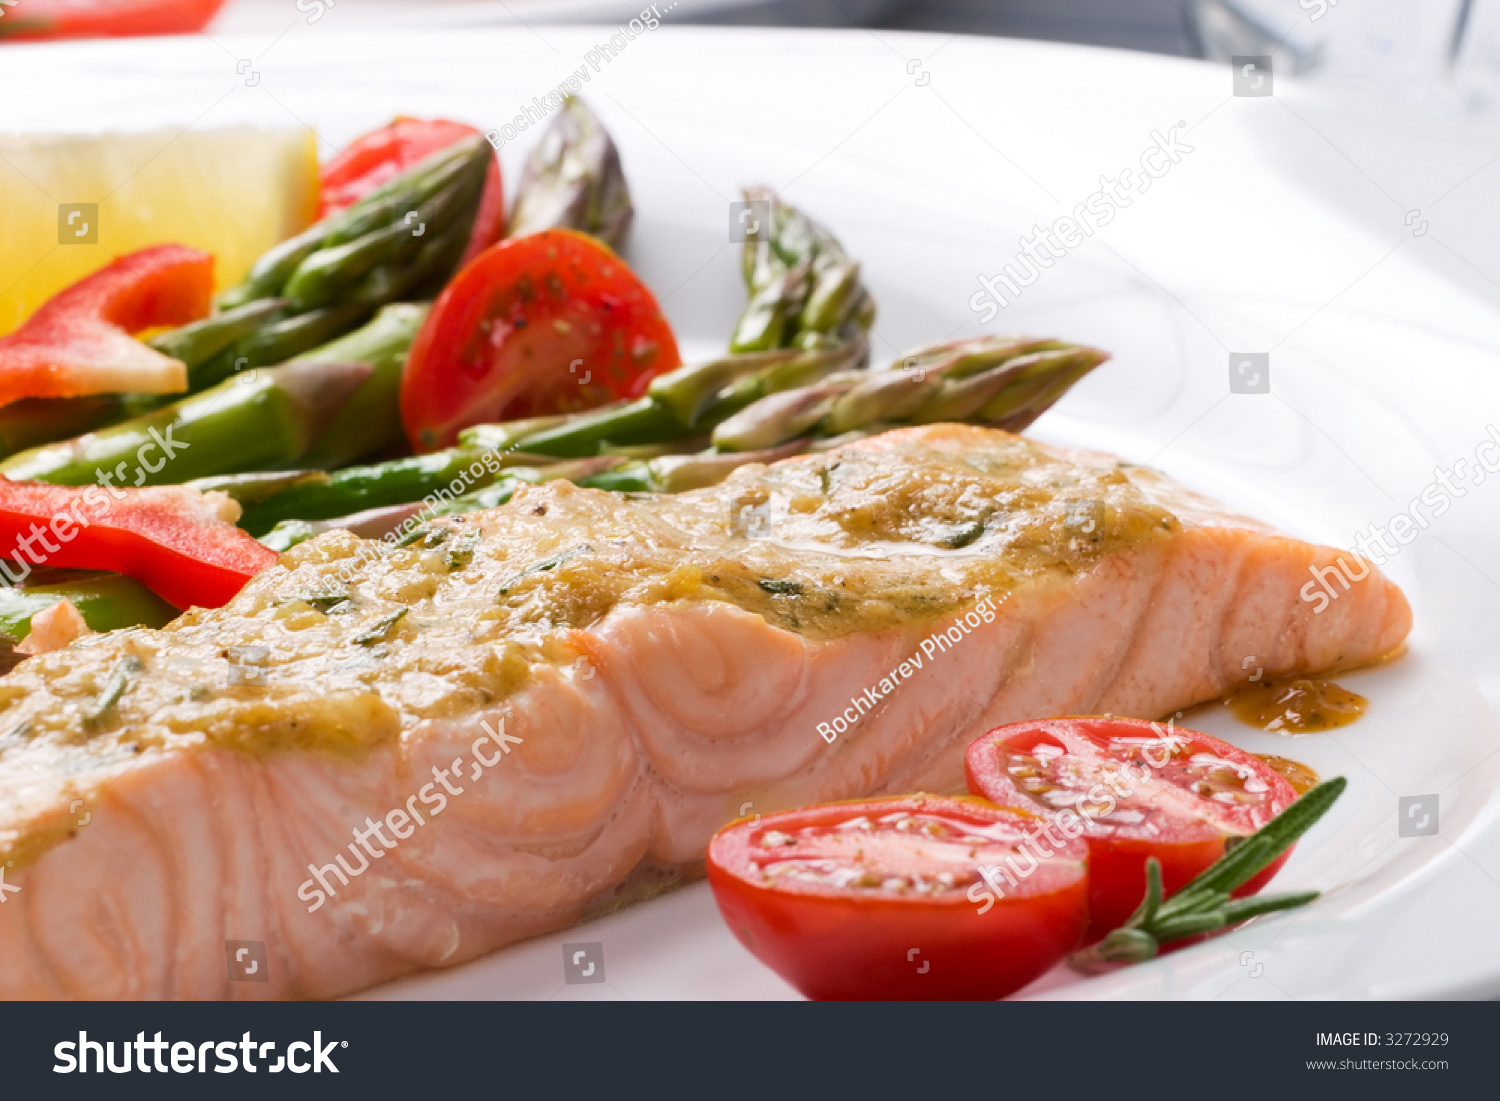 Rosemary Roasted Salmon Served With Asparagus, Cherry Tomatoes, Red ...